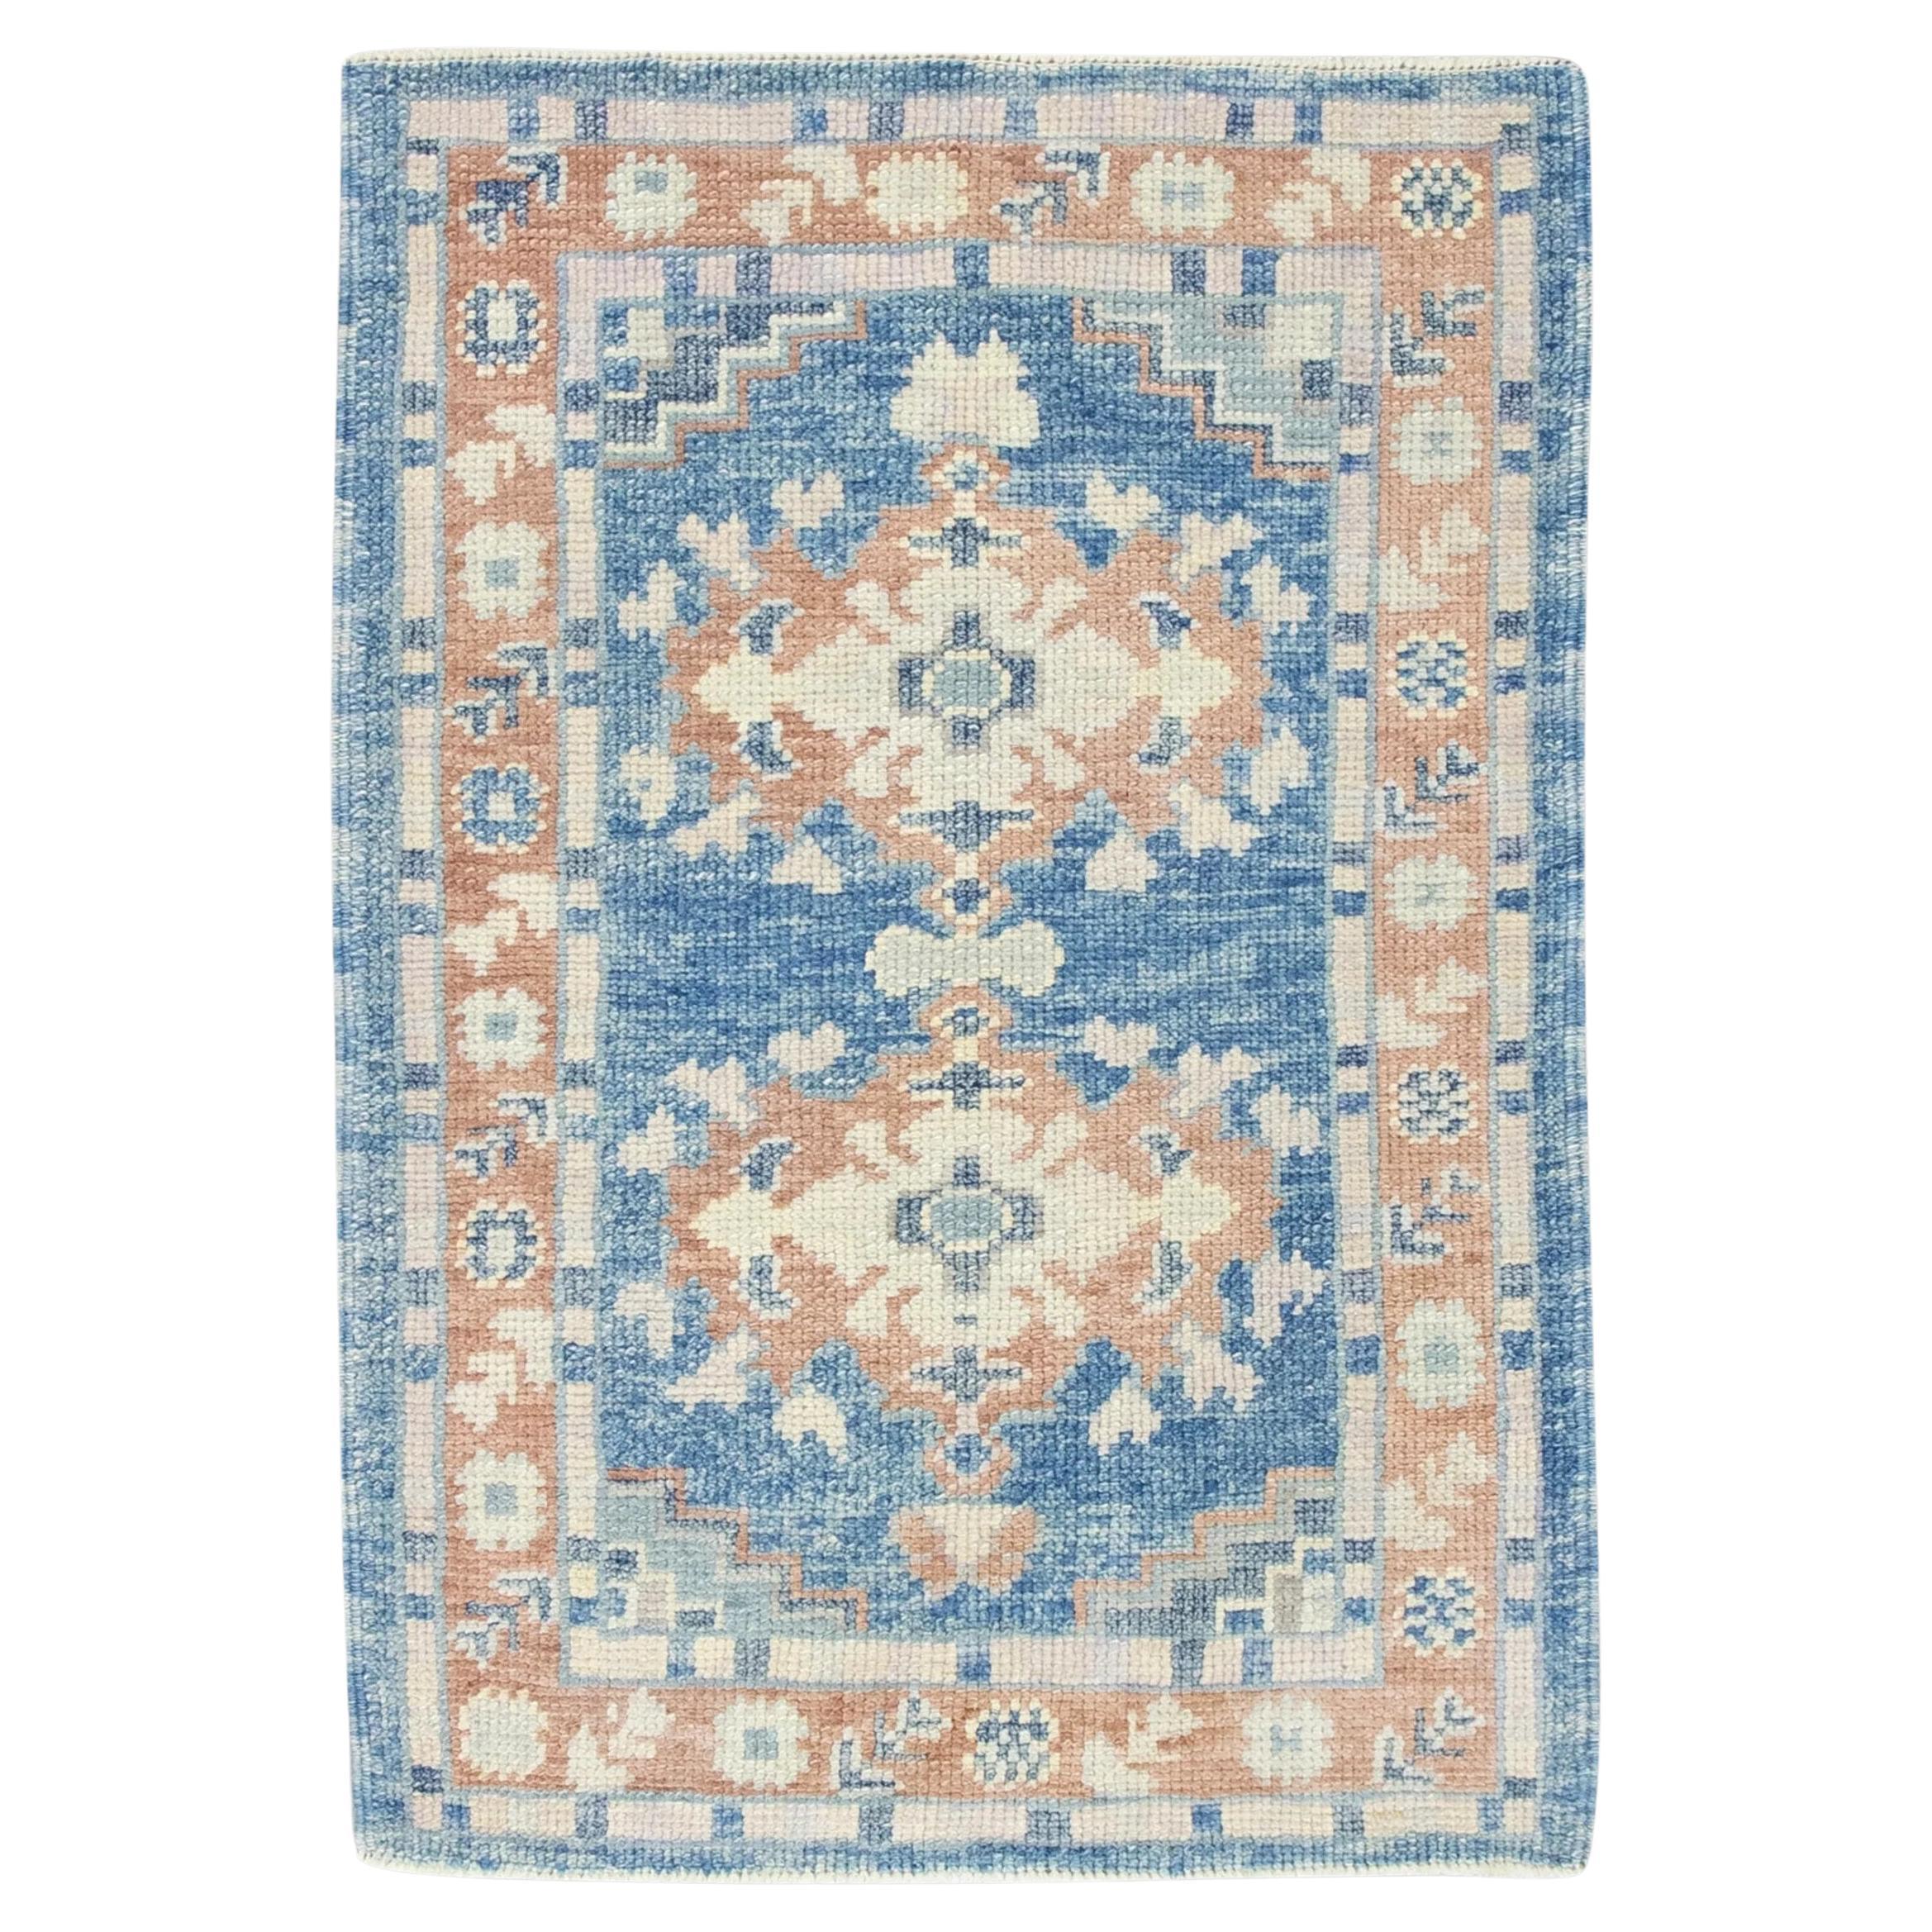 Blue and Salmon Floral Design Handwoven Wool Turkish Oushak Rug 2'4" x 3'3"